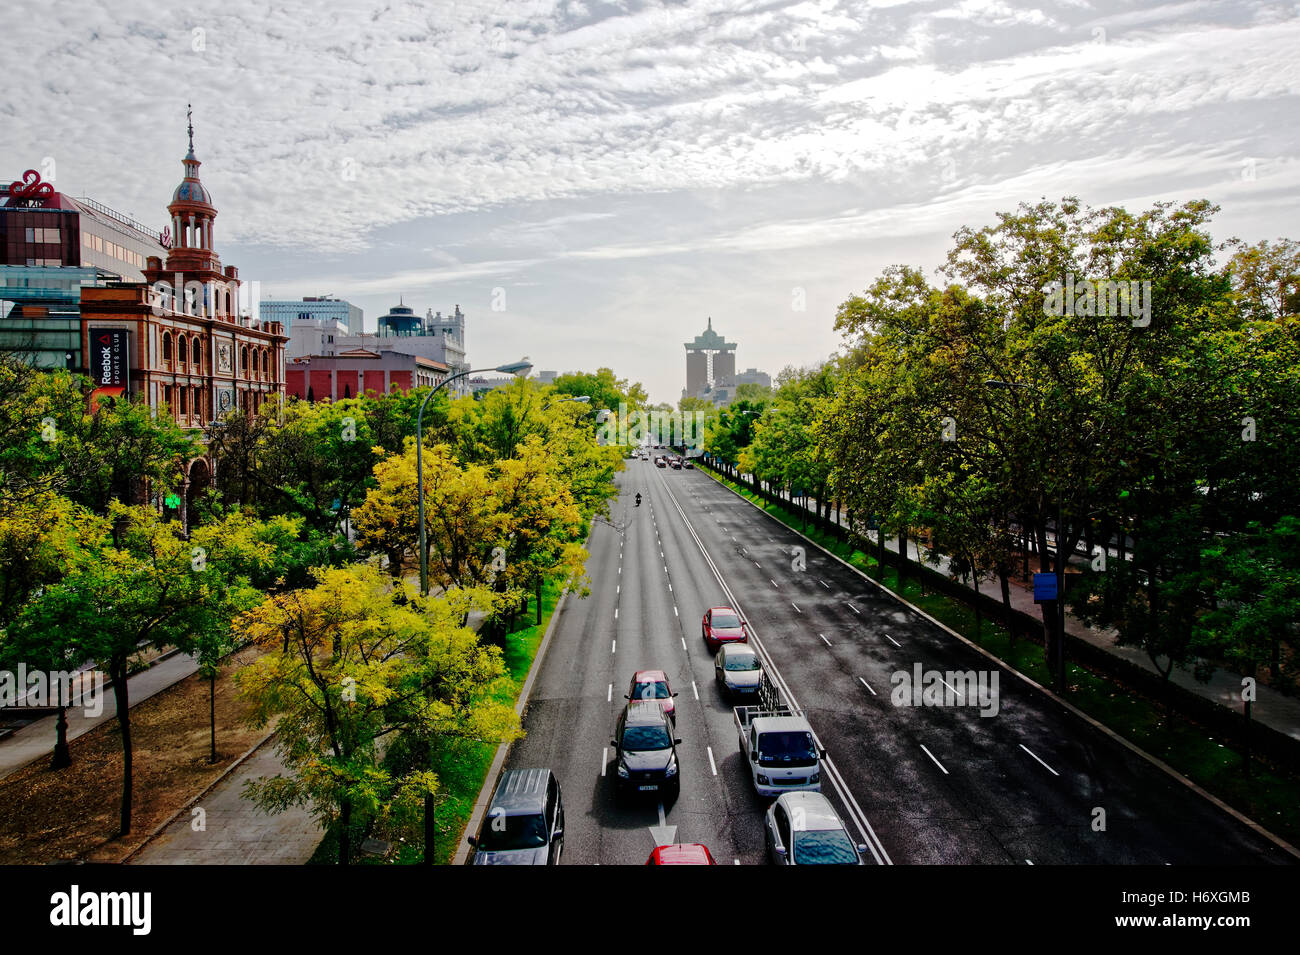 Serrano Street Madrid High Resolution Stock Photography and Images - Alamy